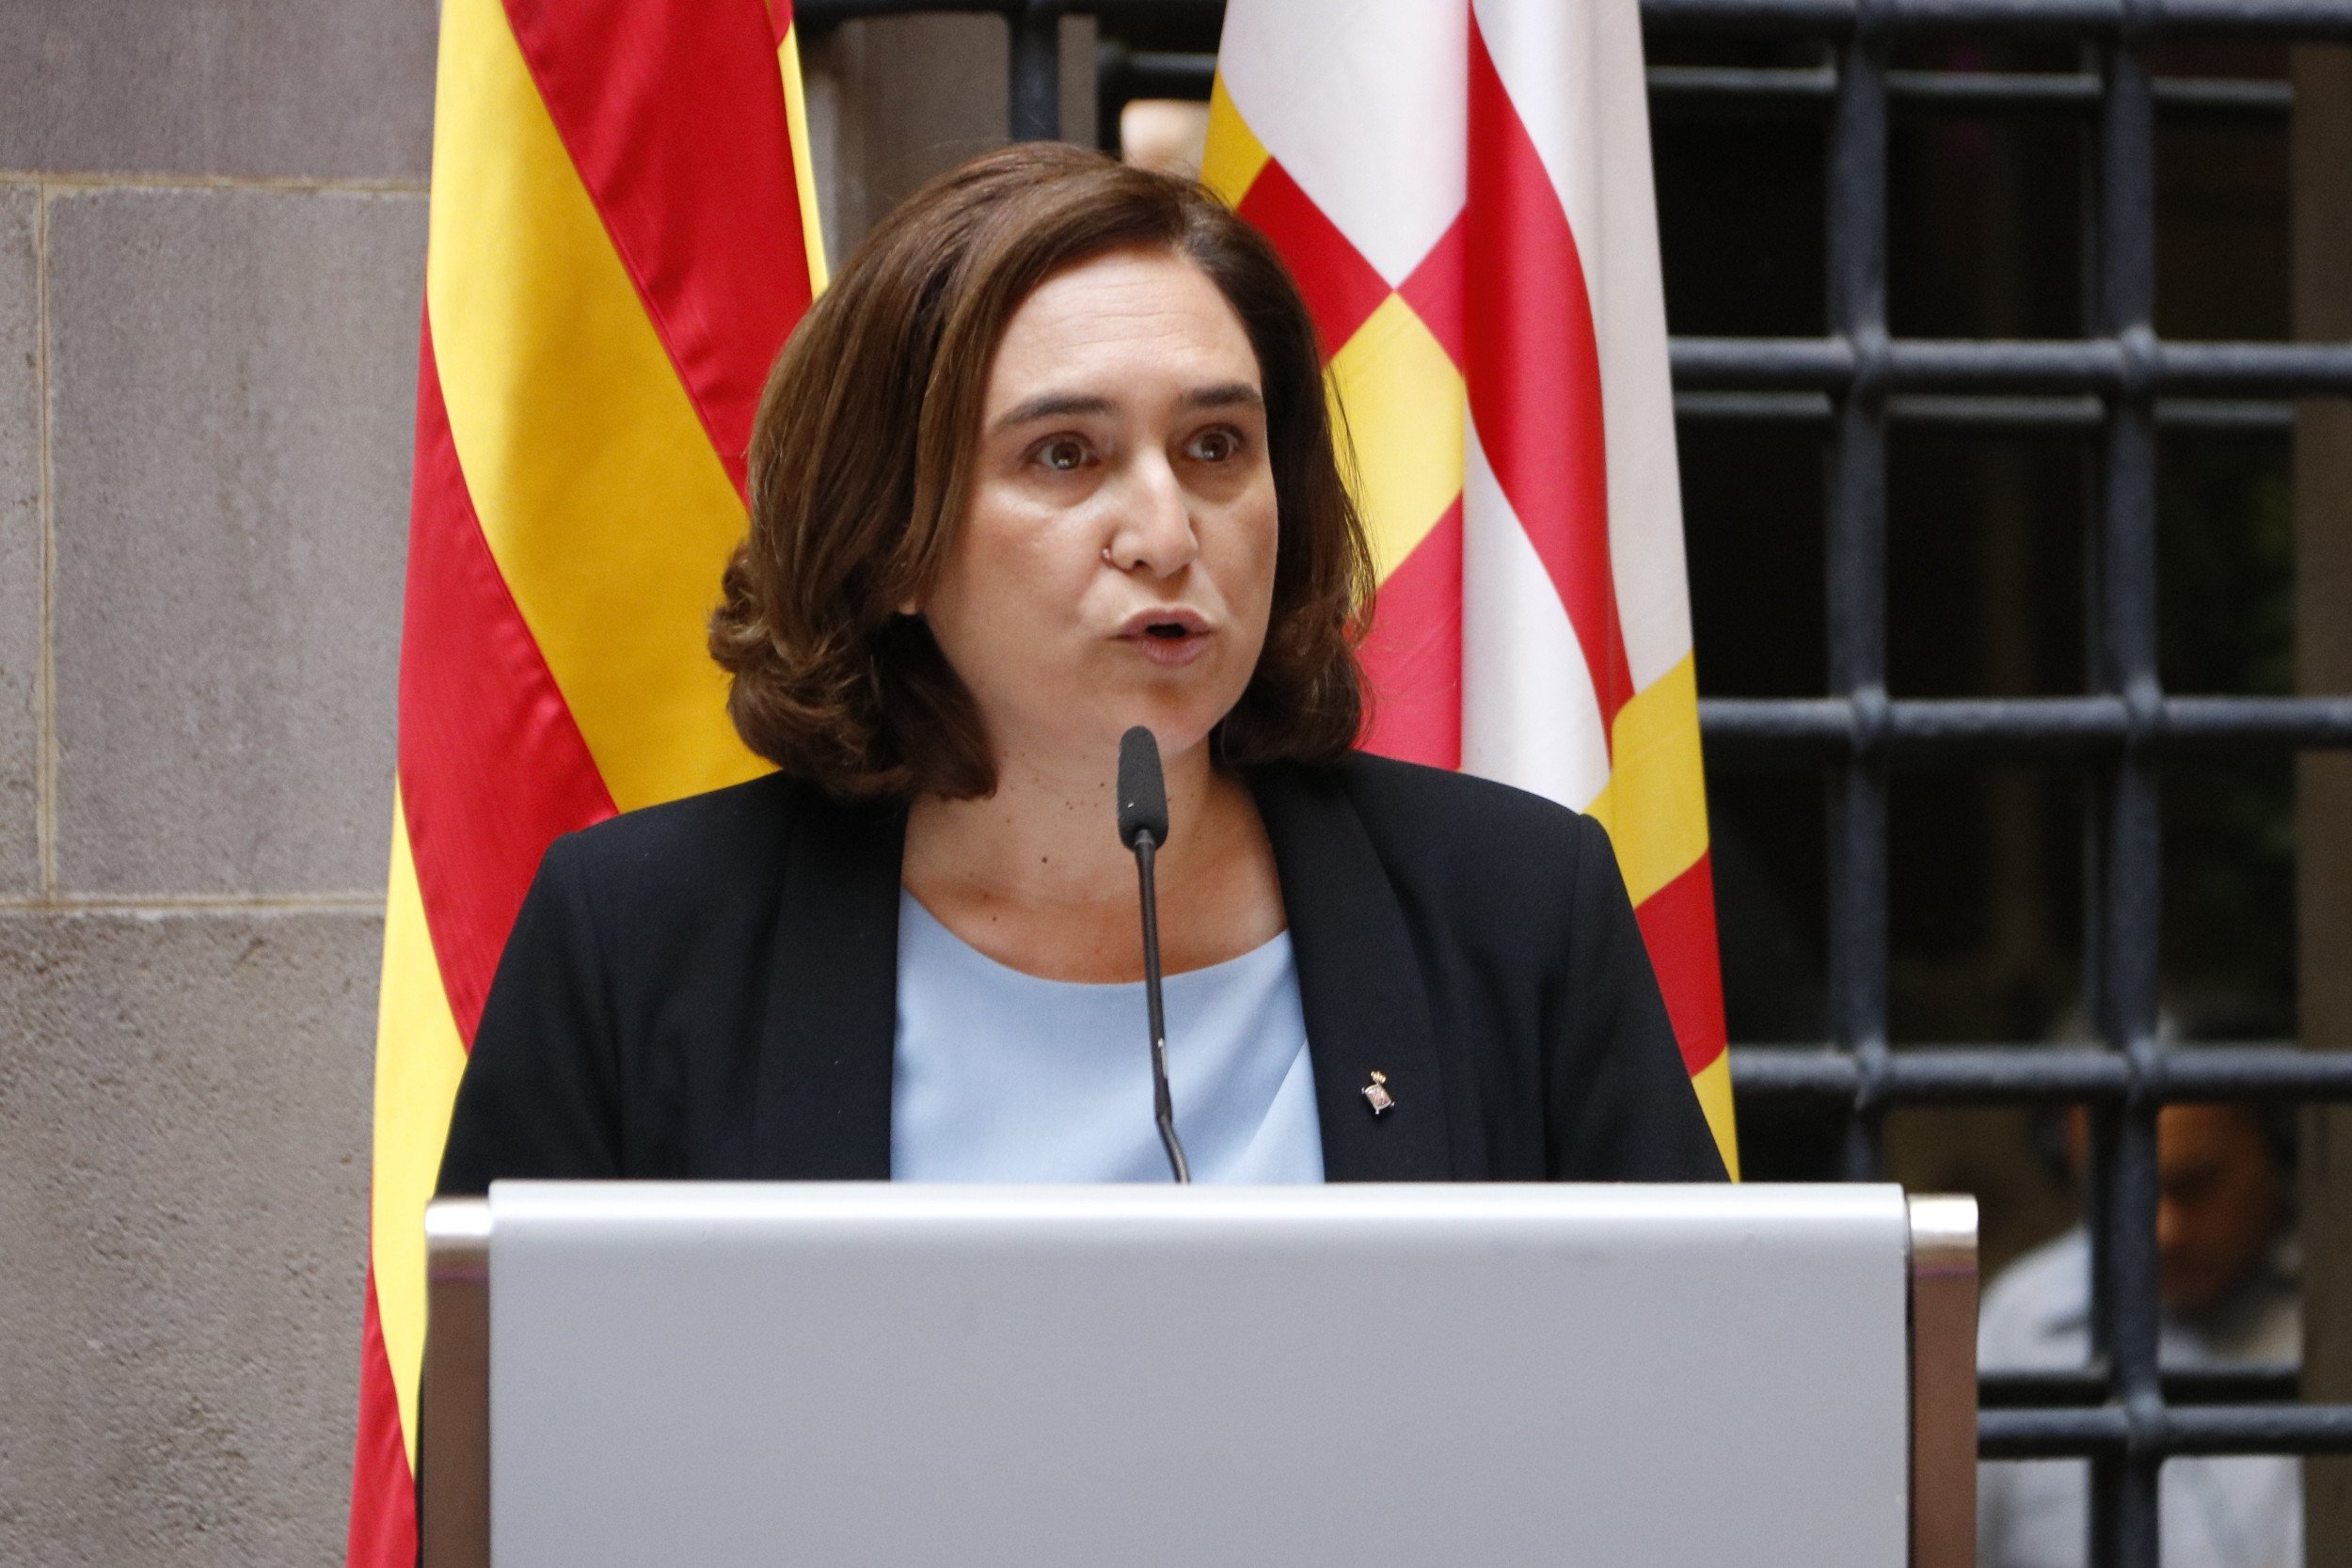 Barcelona mayor against unilateral declaration of independence or removing Catalonia's autonomy